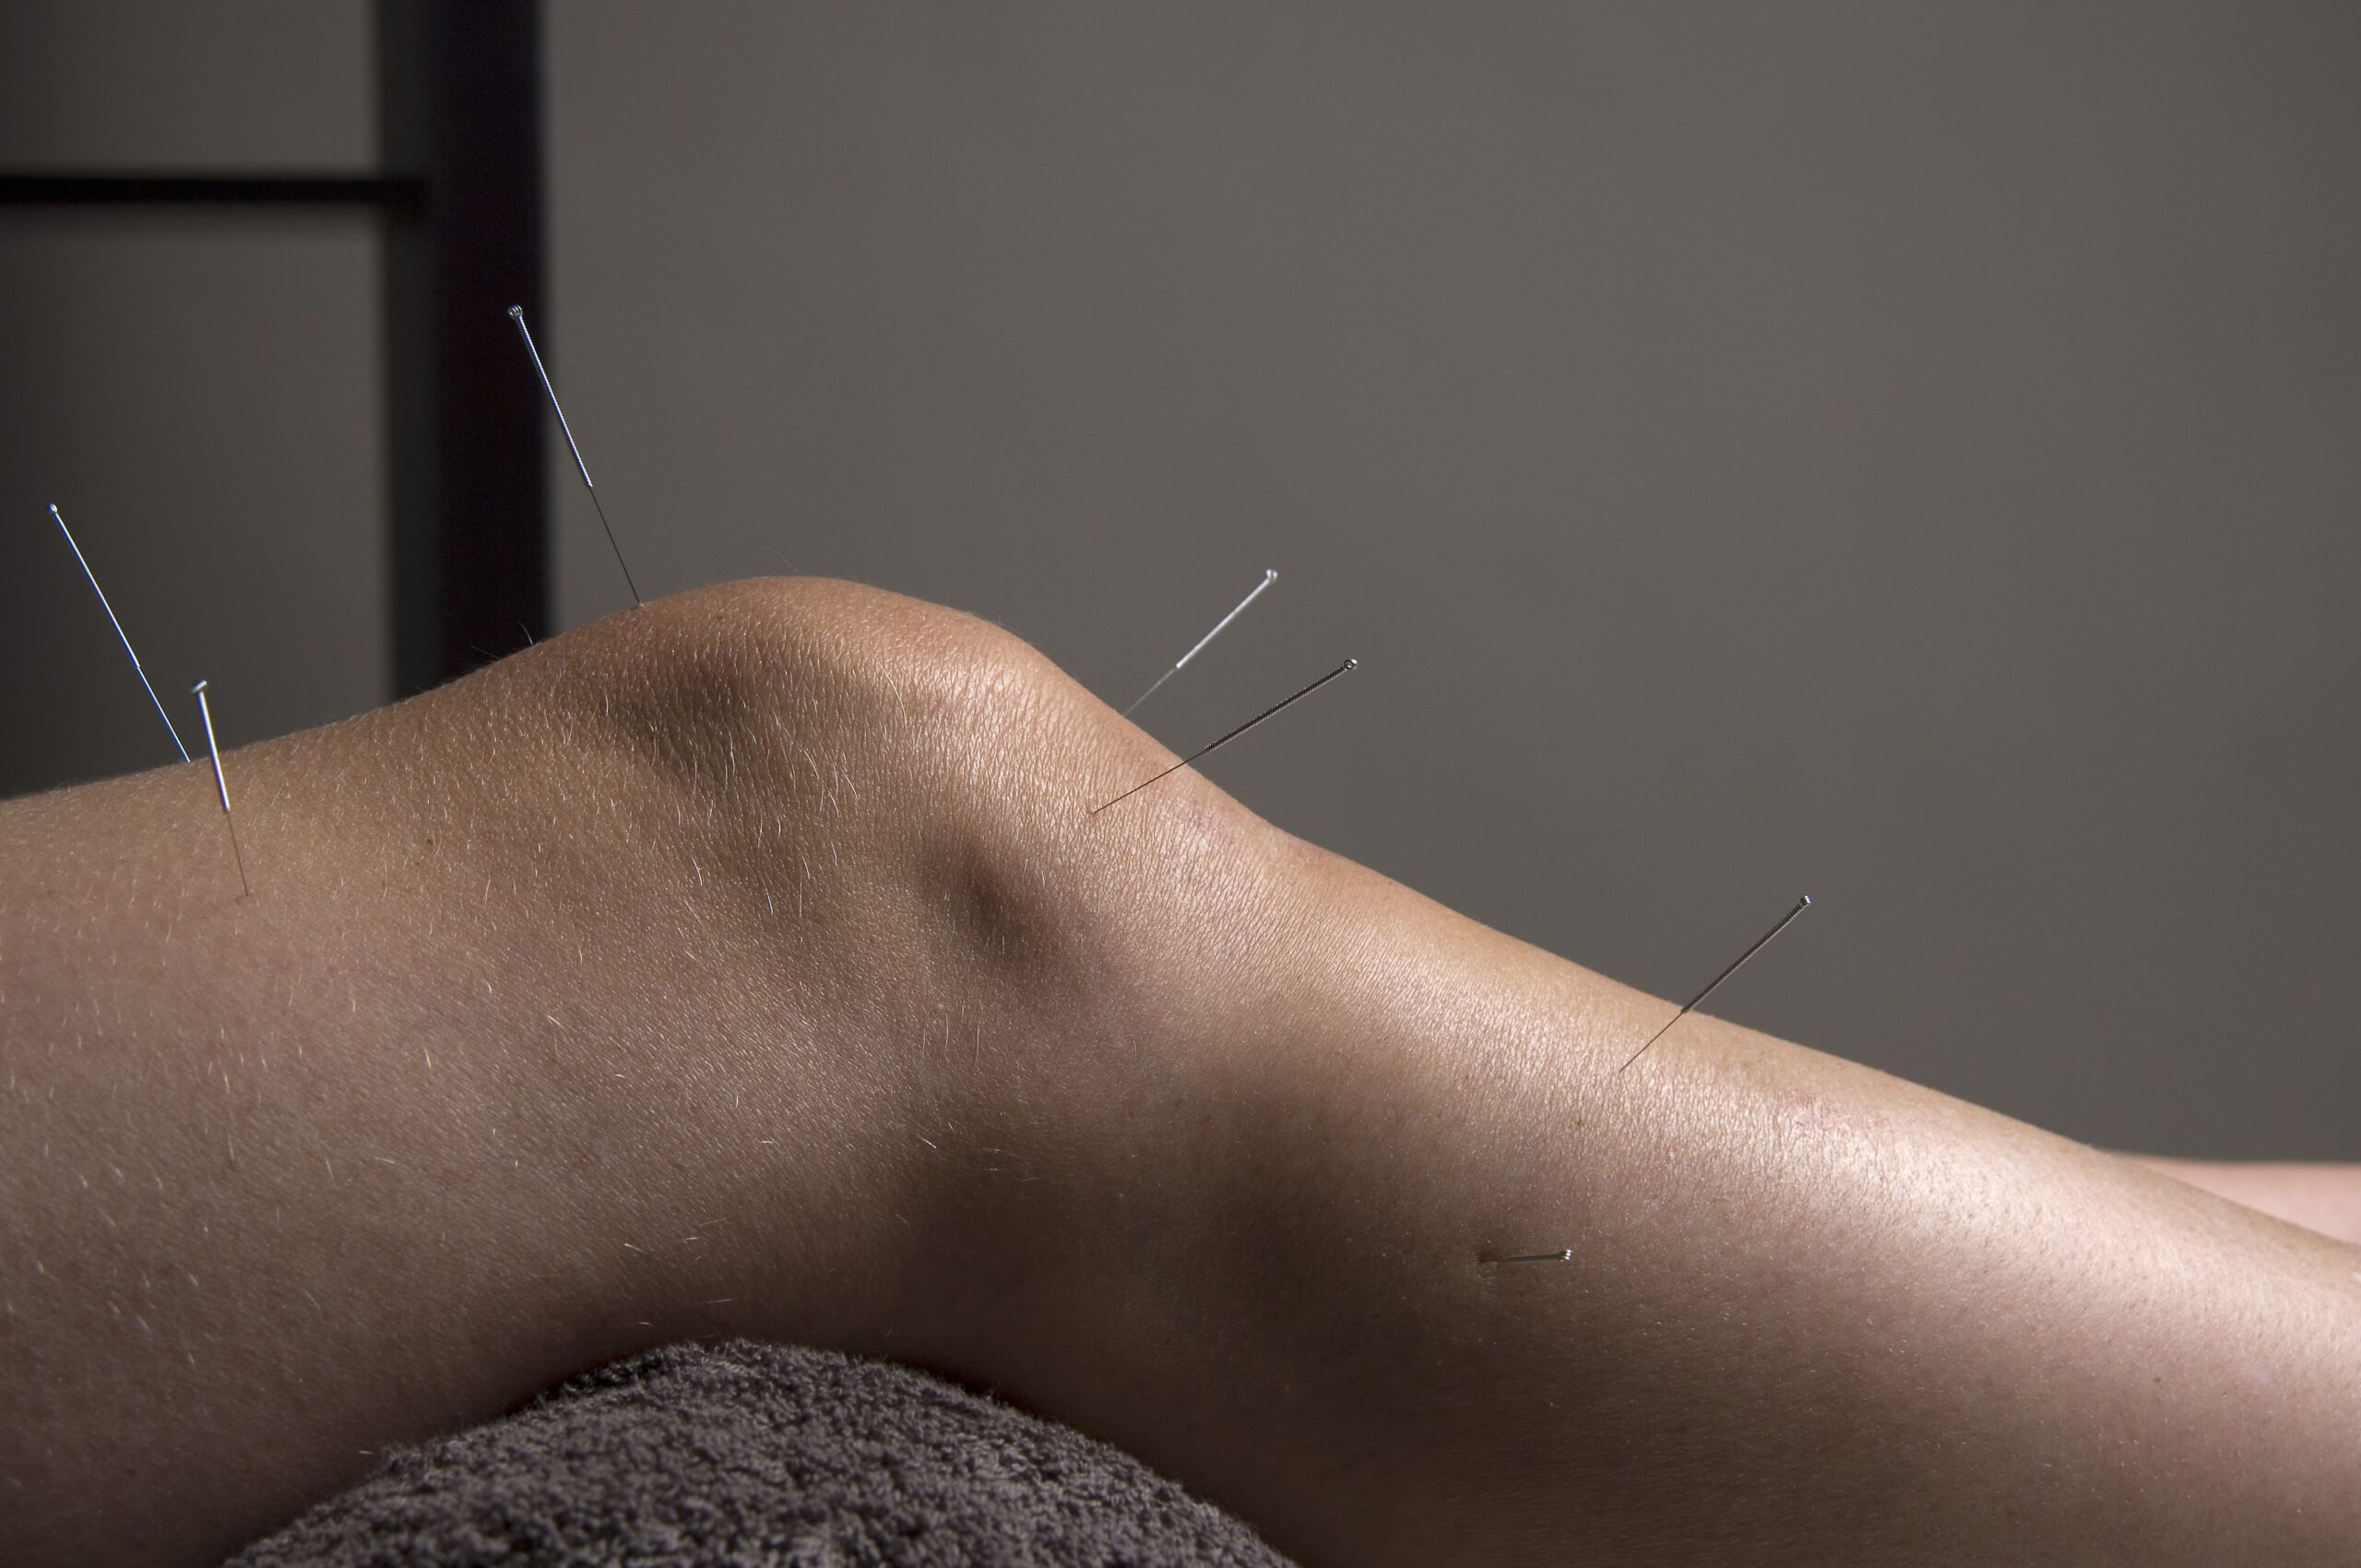 Acupuncture needles inserted on knee and leg.